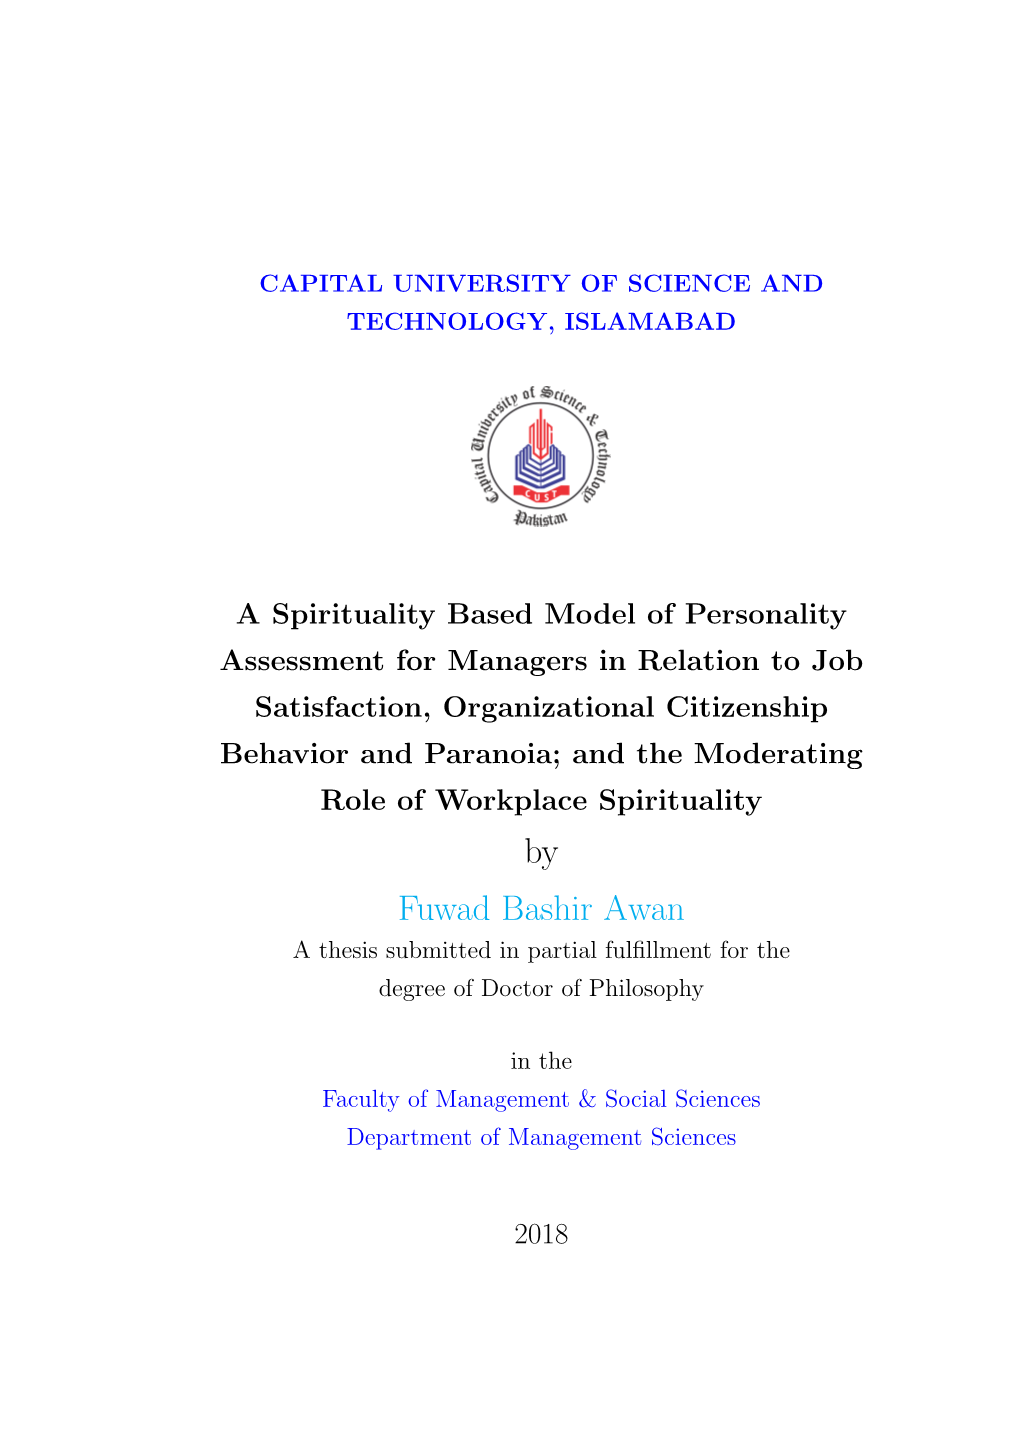 By Fuwad Bashir Awan a Thesis Submitted in Partial Fulﬁllment for the Degree of Doctor of Philosophy